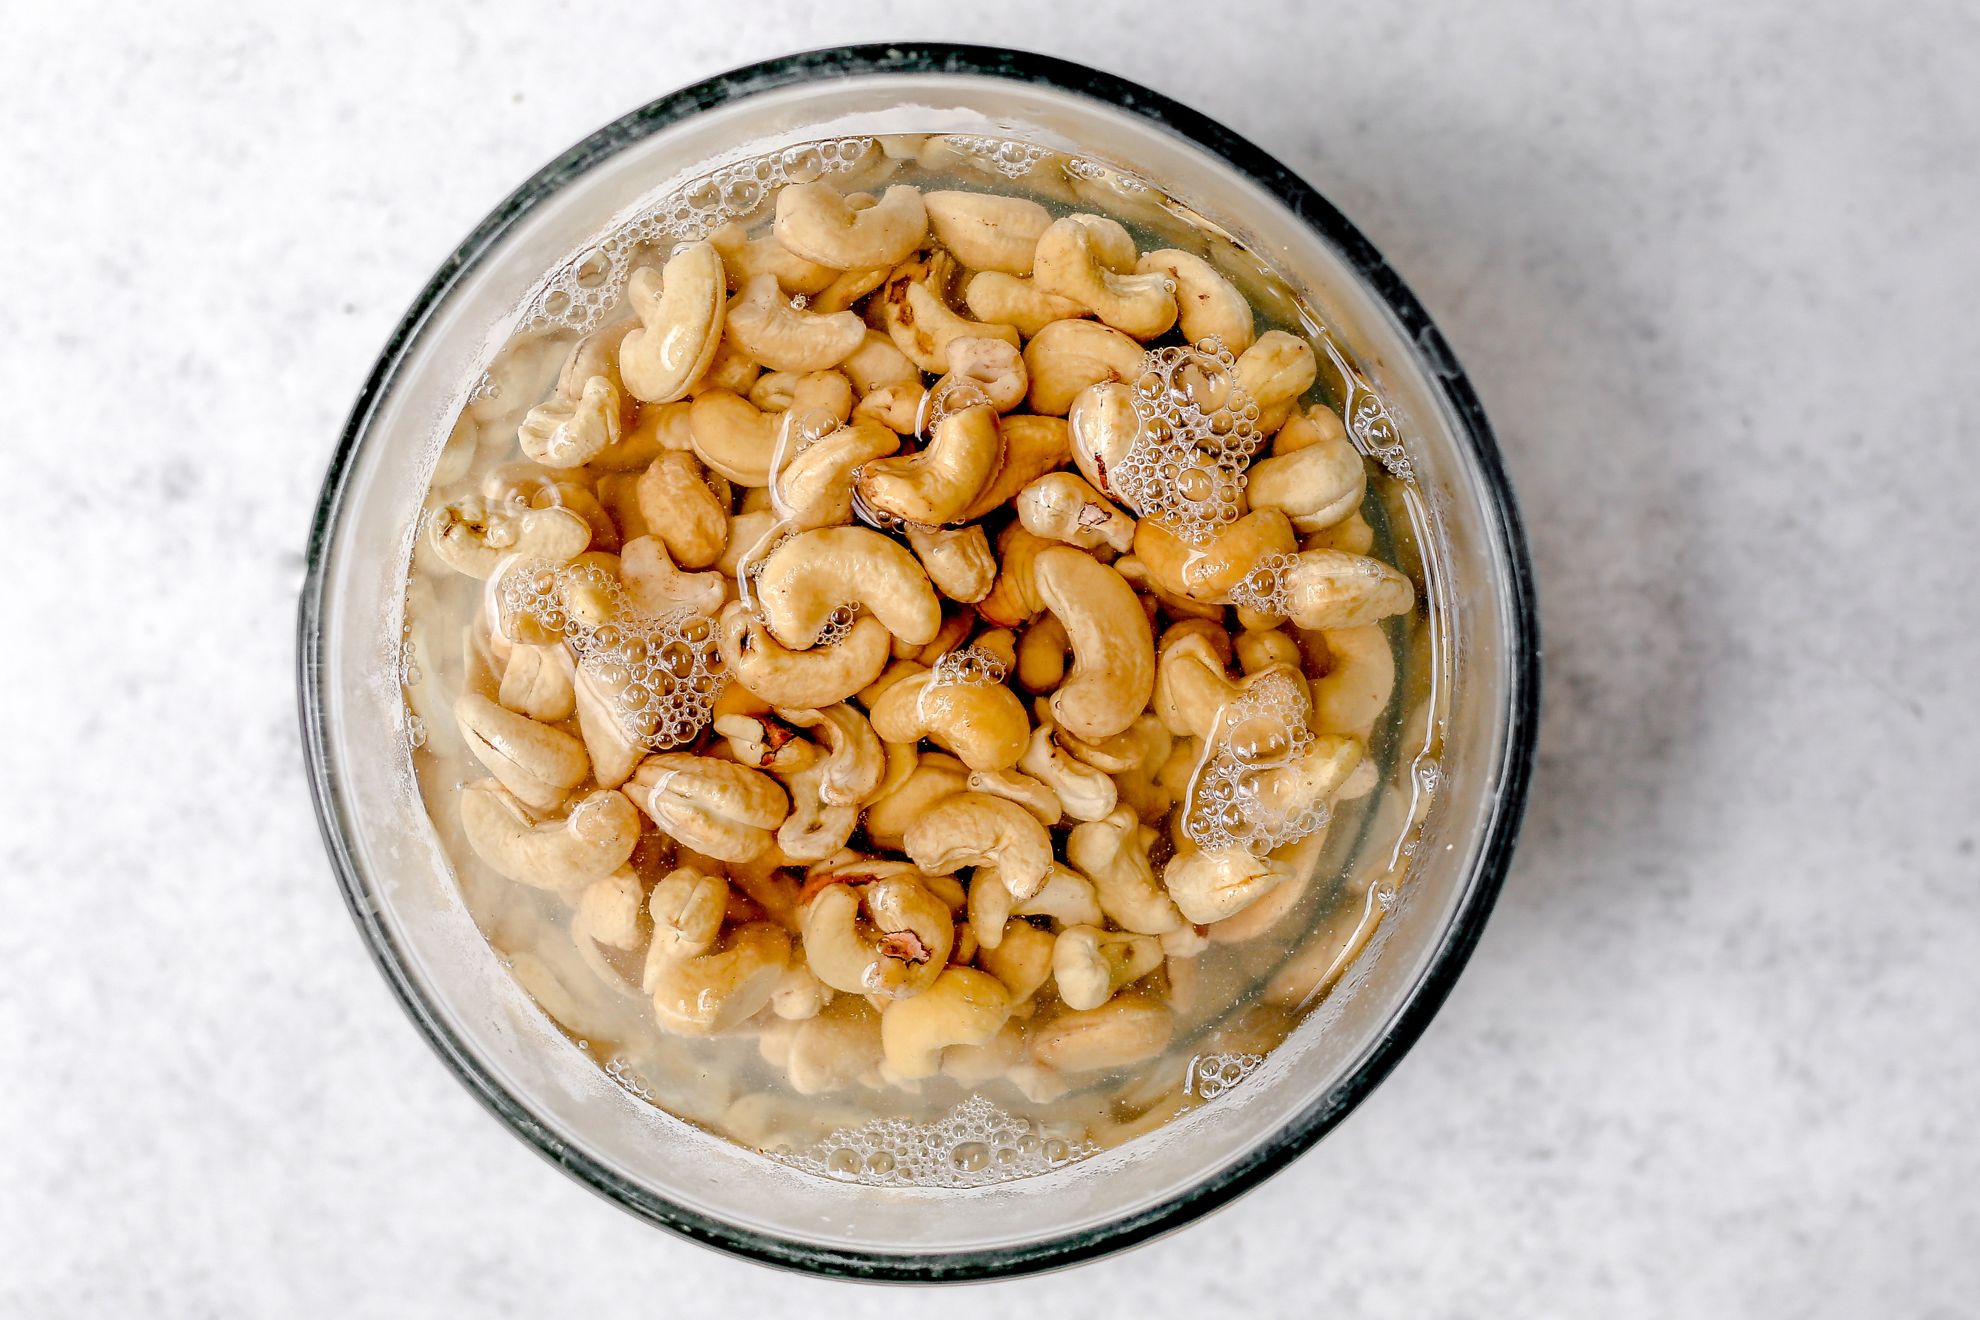 This is an overhead horizontal image of cashews soaking in water in a glass bowl. The bowl sits on a light grey surface.